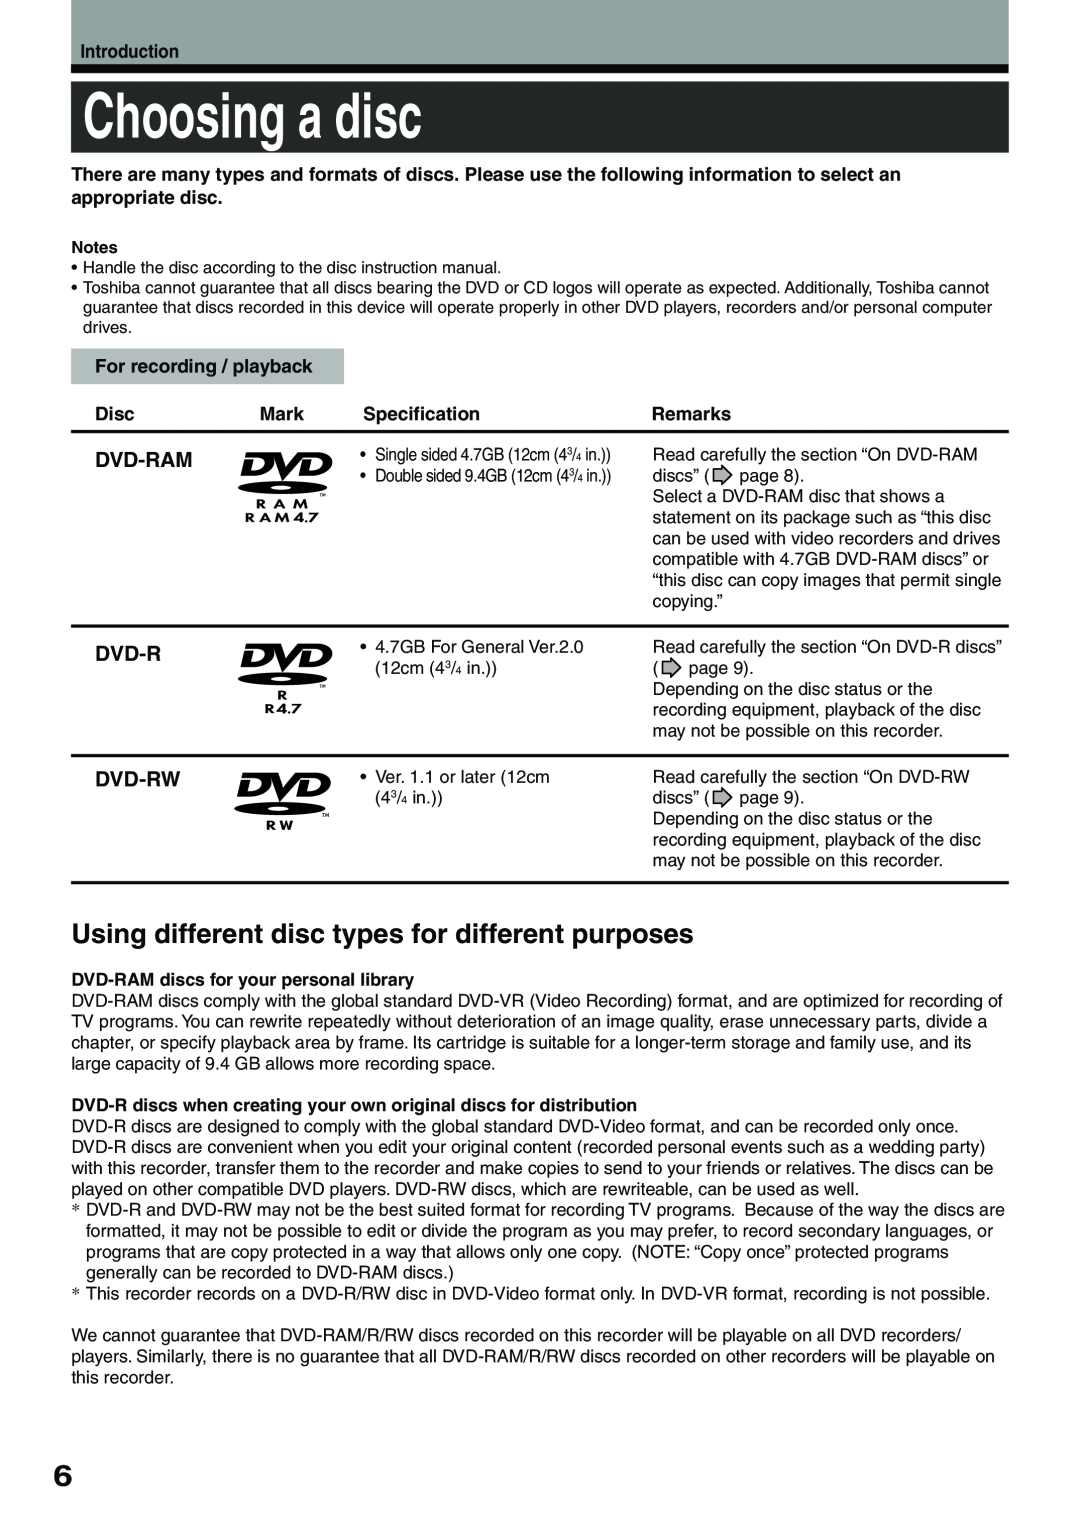 Toshiba D-KR4SU Choosing a disc, Using different disc types for different purposes, Dvd-Ram, Dvd-Rw, Disc, Mark, Remarks 